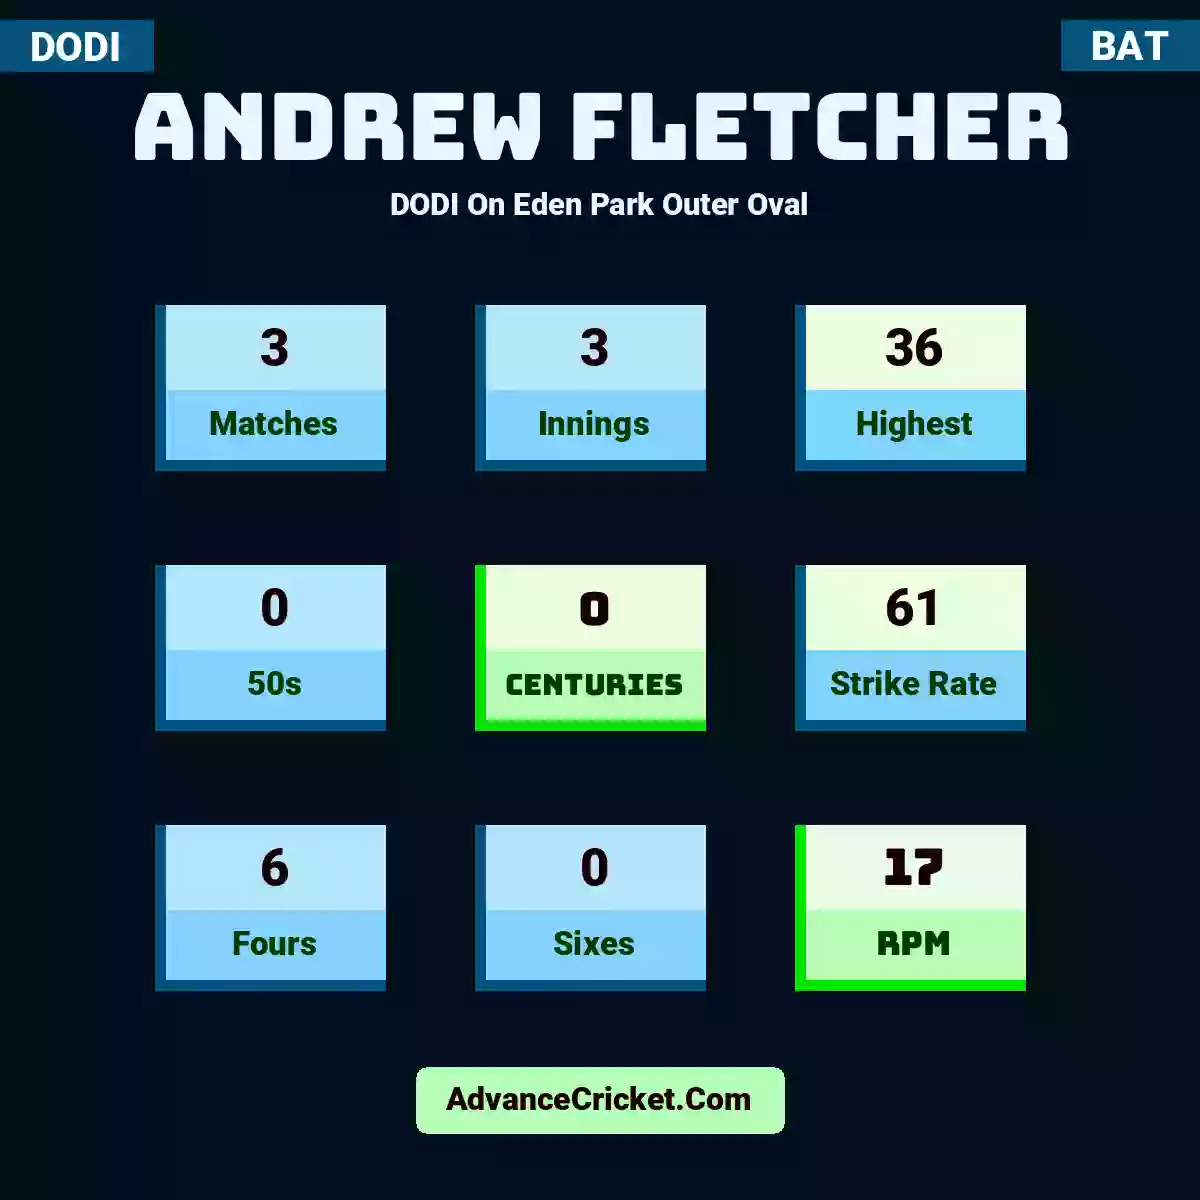 Andrew Fletcher DODI  On Eden Park Outer Oval, Andrew Fletcher played 3 matches, scored 36 runs as highest, 0 half-centuries, and 0 centuries, with a strike rate of 61. A.Fletcher hit 6 fours and 0 sixes, with an RPM of 17.